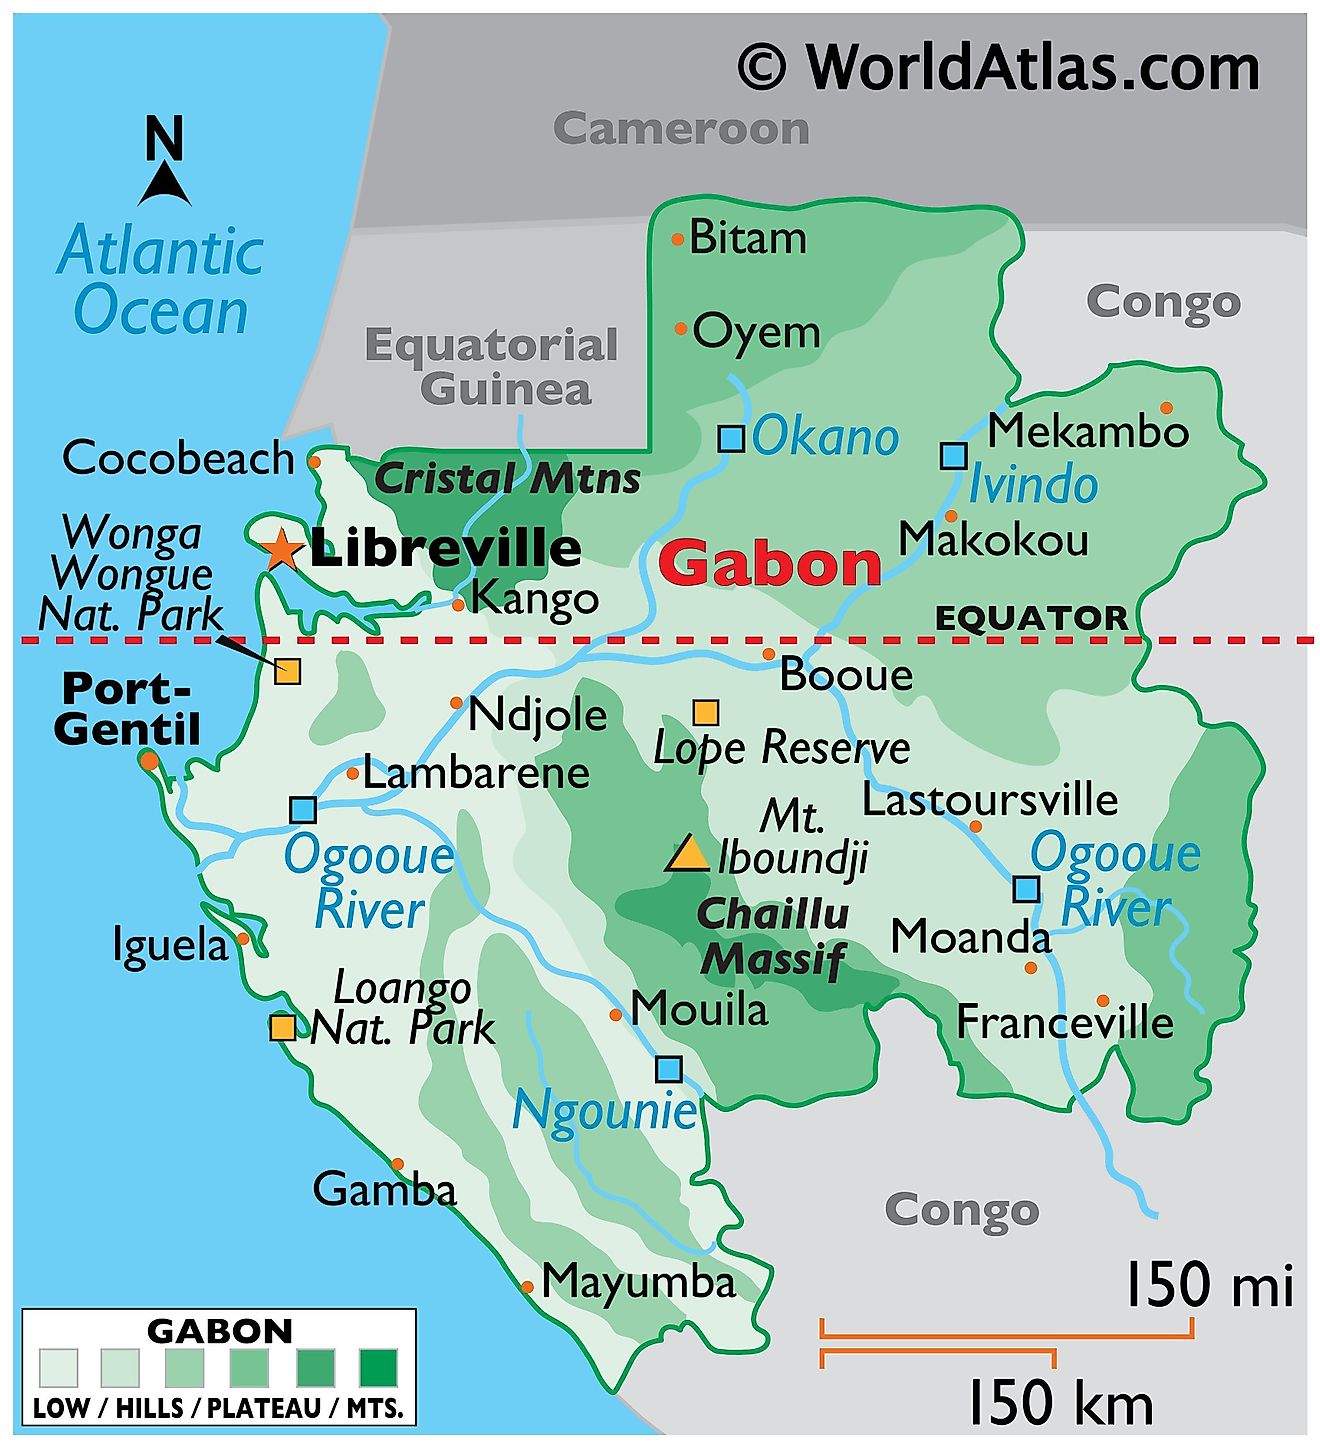 Physical Map of Gabon displaying the state boundaries, terrain, important cities, extreme points, major rivers, etc.